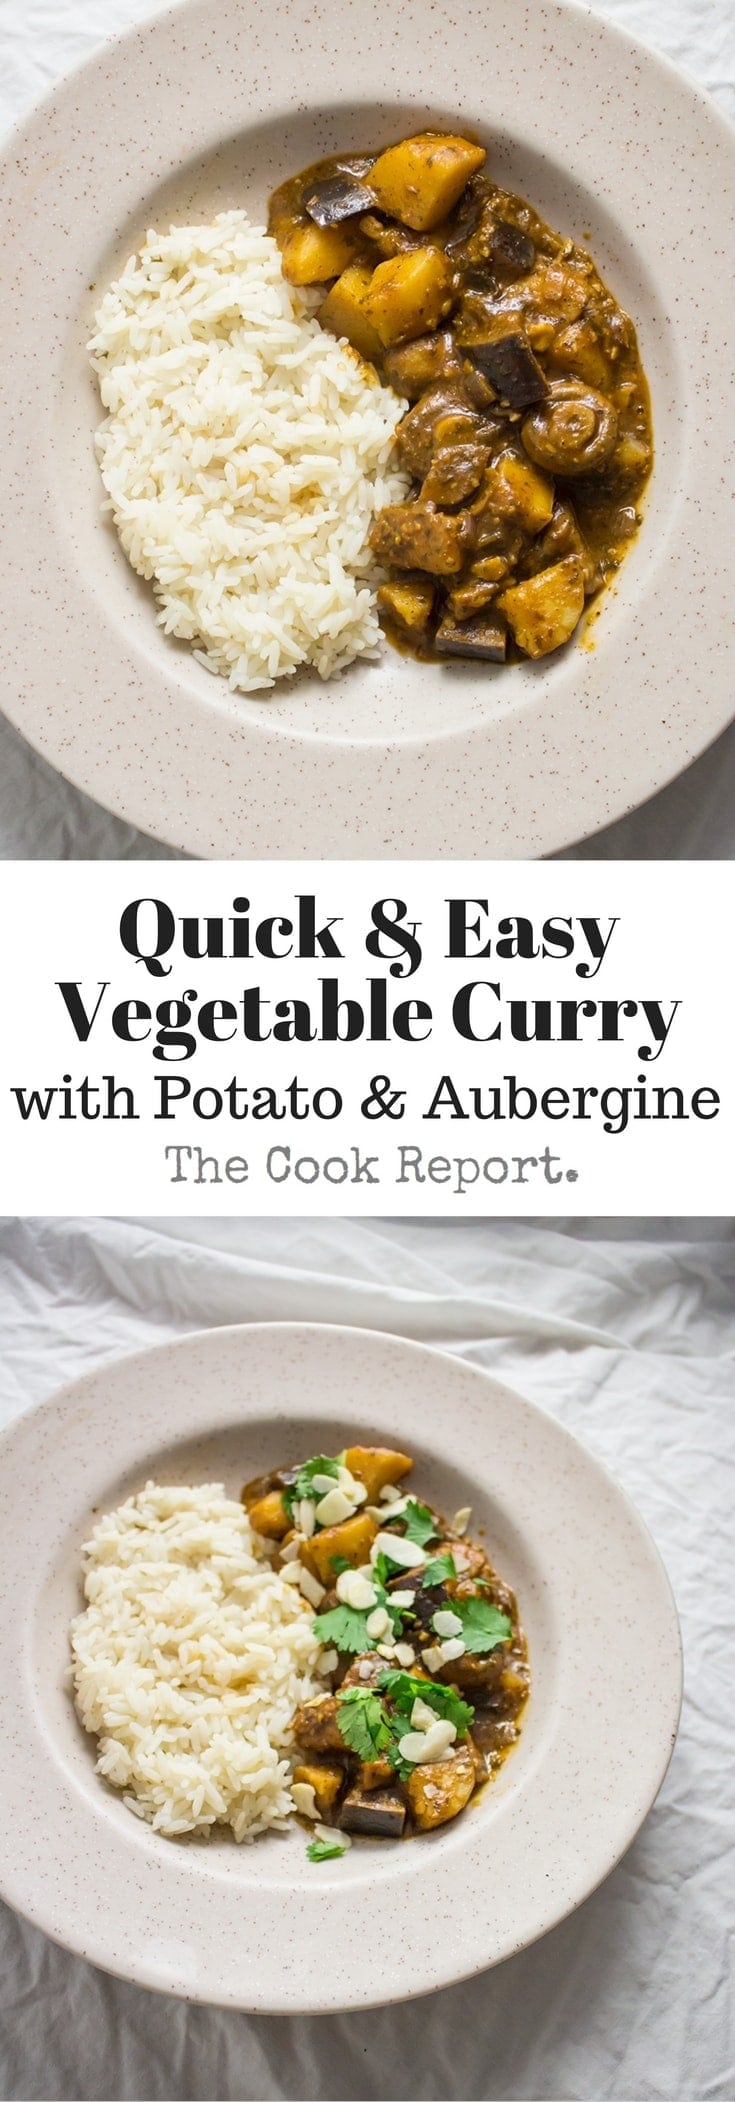 This quick & easy vegetable curry is packed with potatoes, aubergine and mushrooms to make it a filling evening meal. Plus it's gluten free and suitable for vegans!